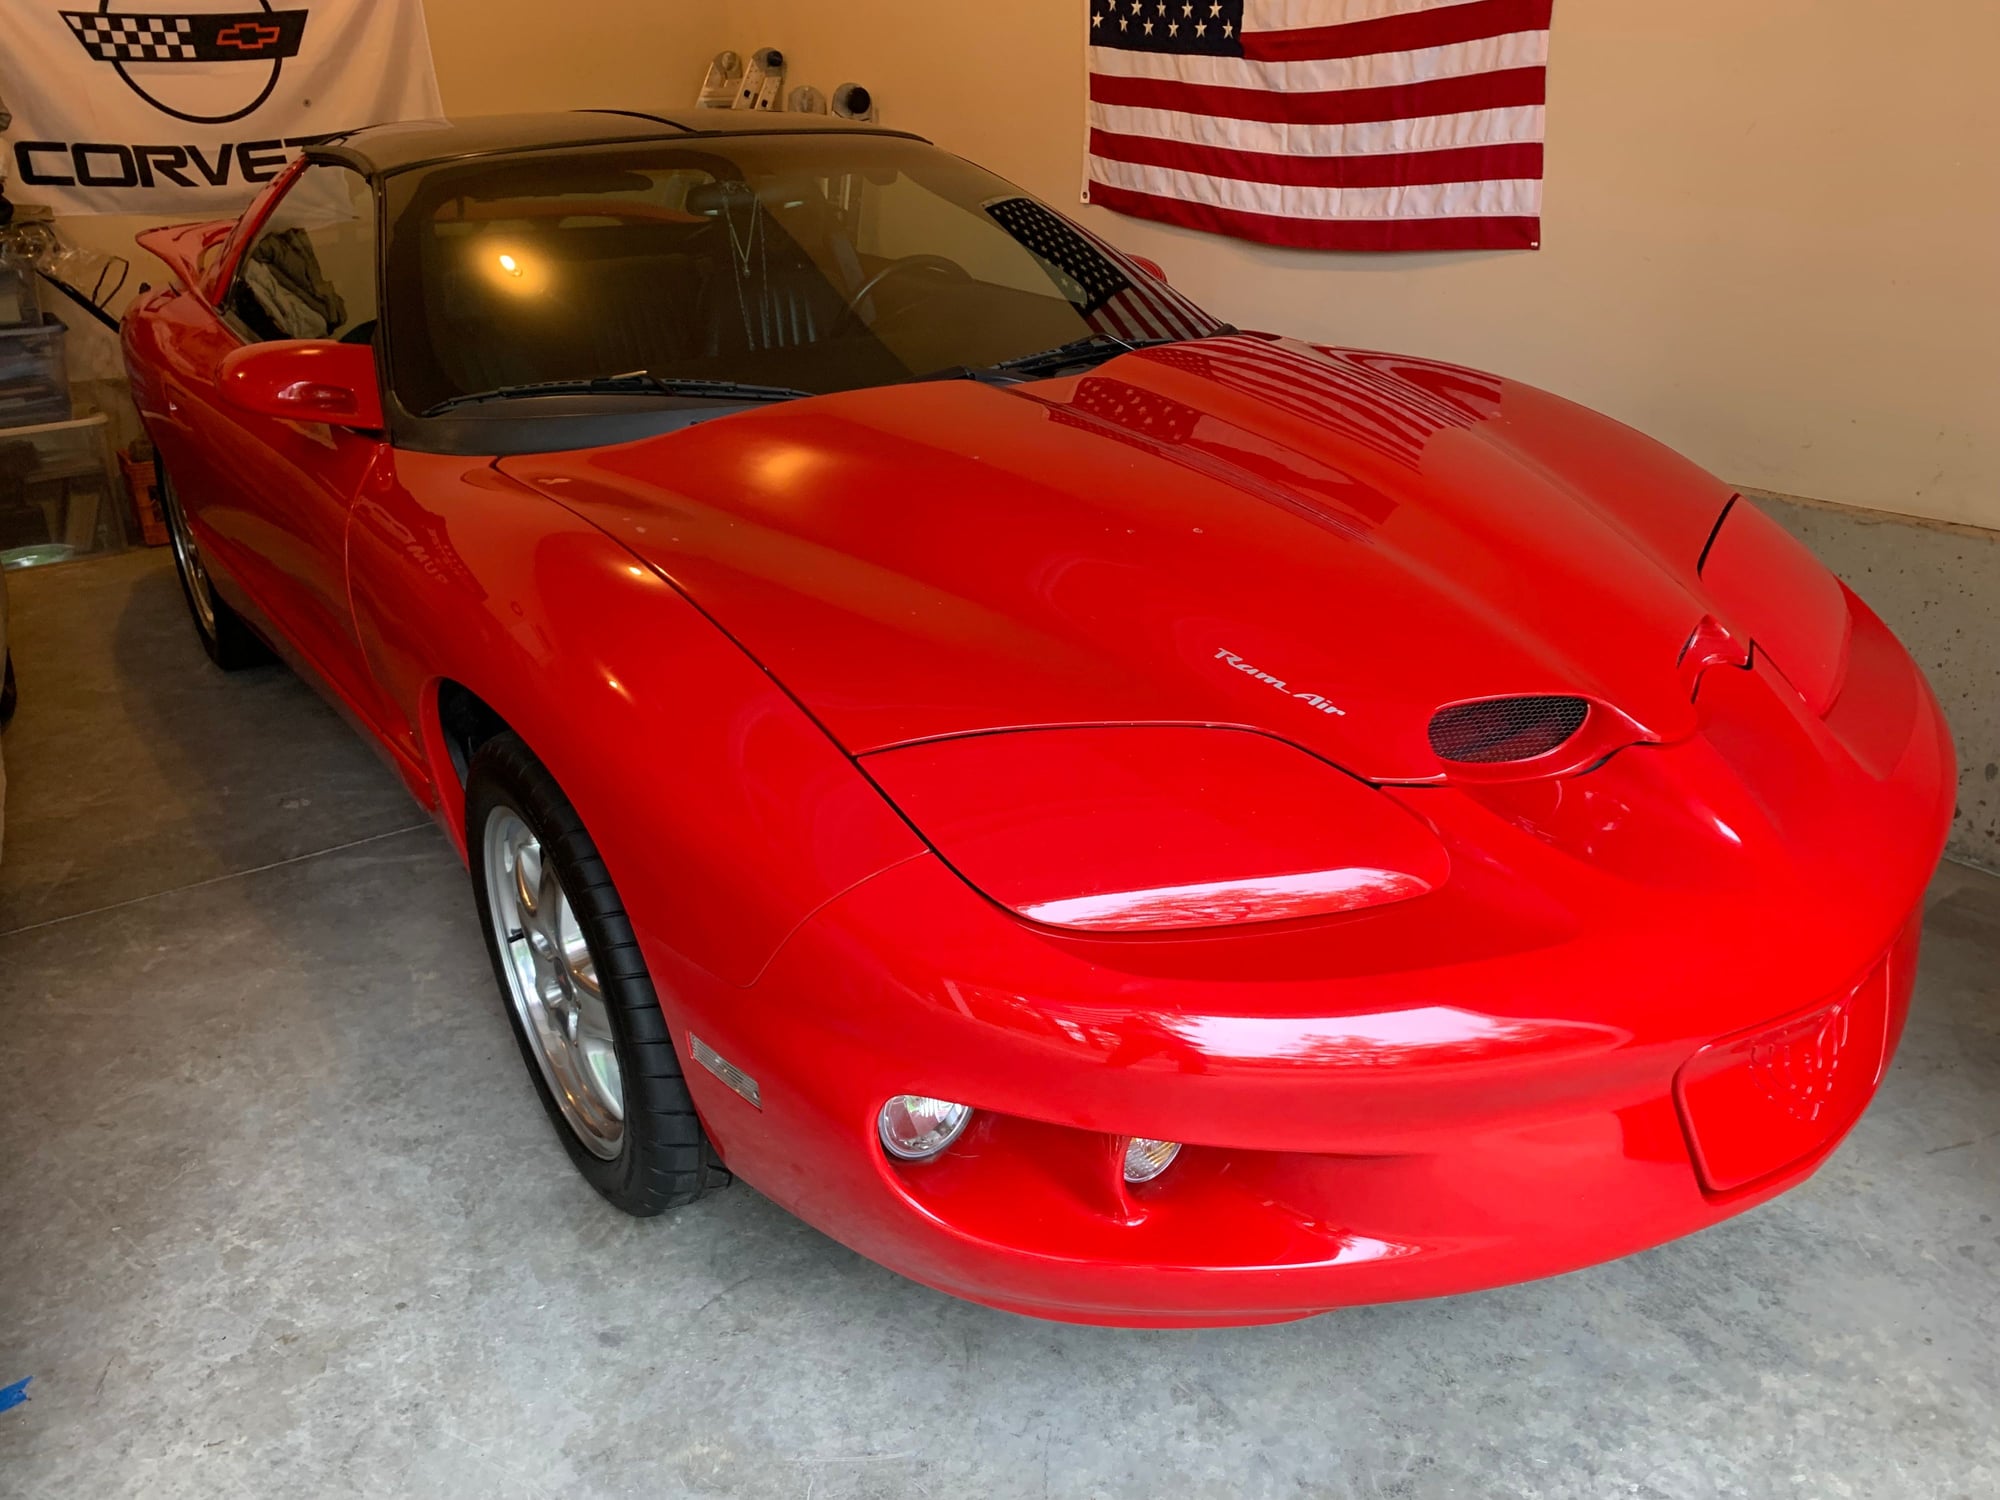 2001 Pontiac Firebird - 2001 Firebird Formula - Used - VIN 2G2FV22G312137925 - 64,000 Miles - 8 cyl - 2WD - Automatic - Coupe - Red - Hazle Township, PA 18202, United States